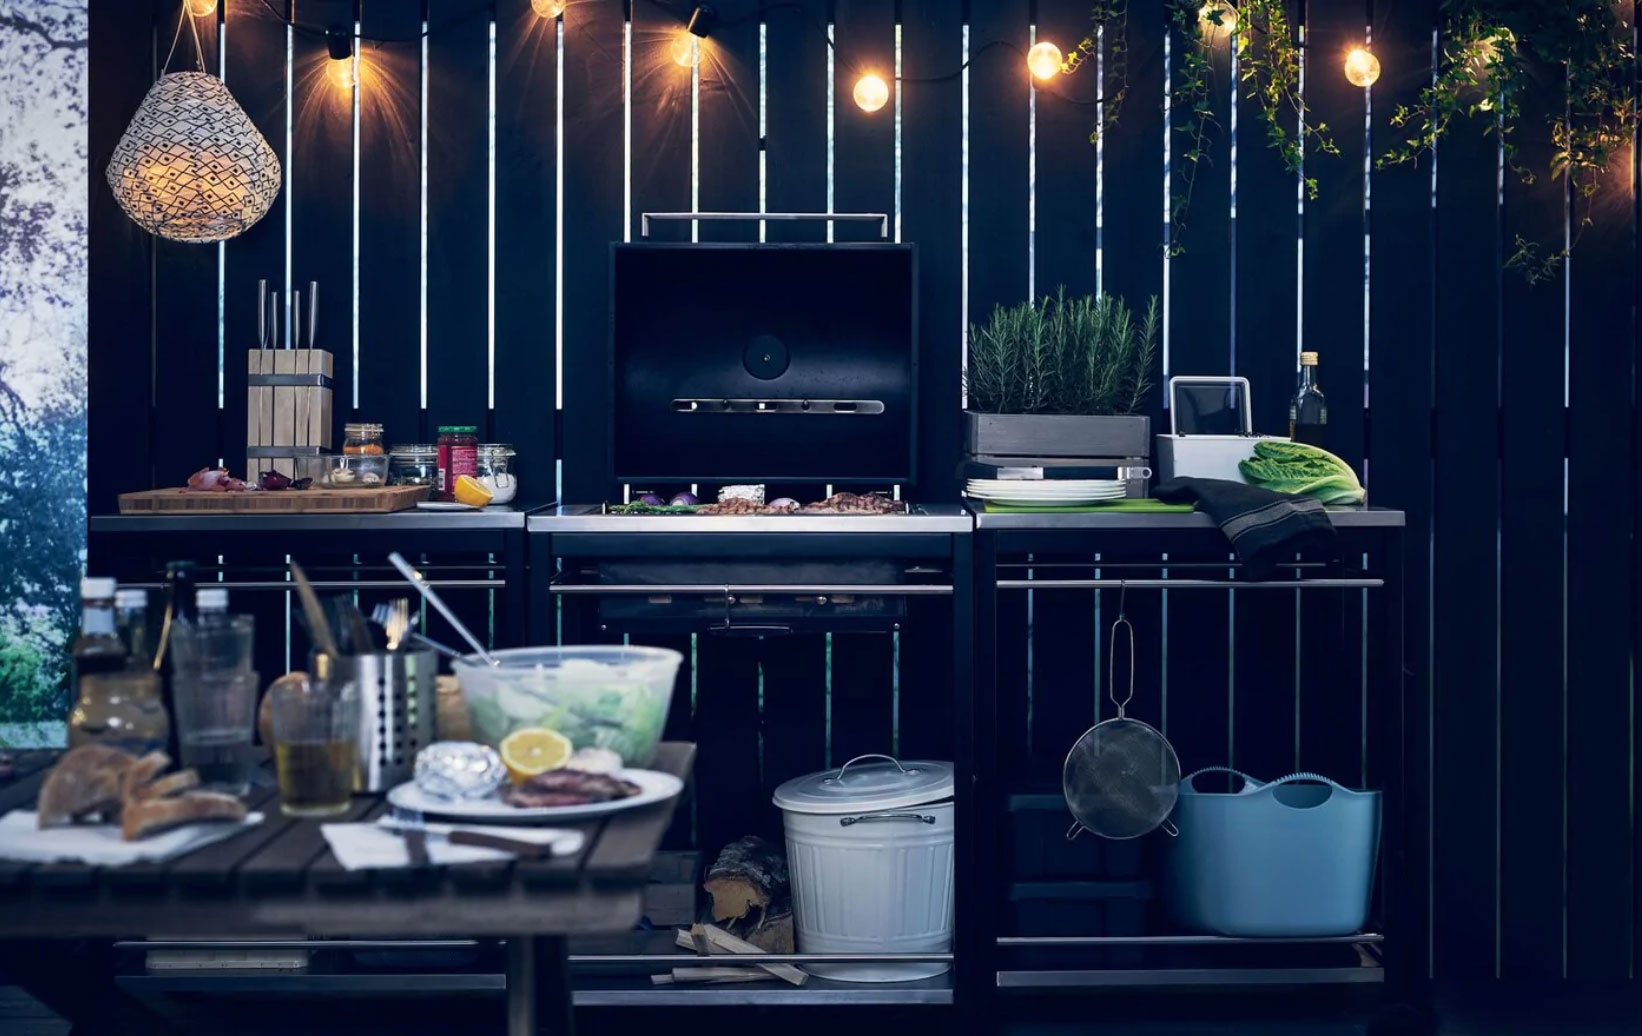 27 Outdoor Kitchen Ideas Diy Modular And Small Space Designs For All Backyards Real Homes